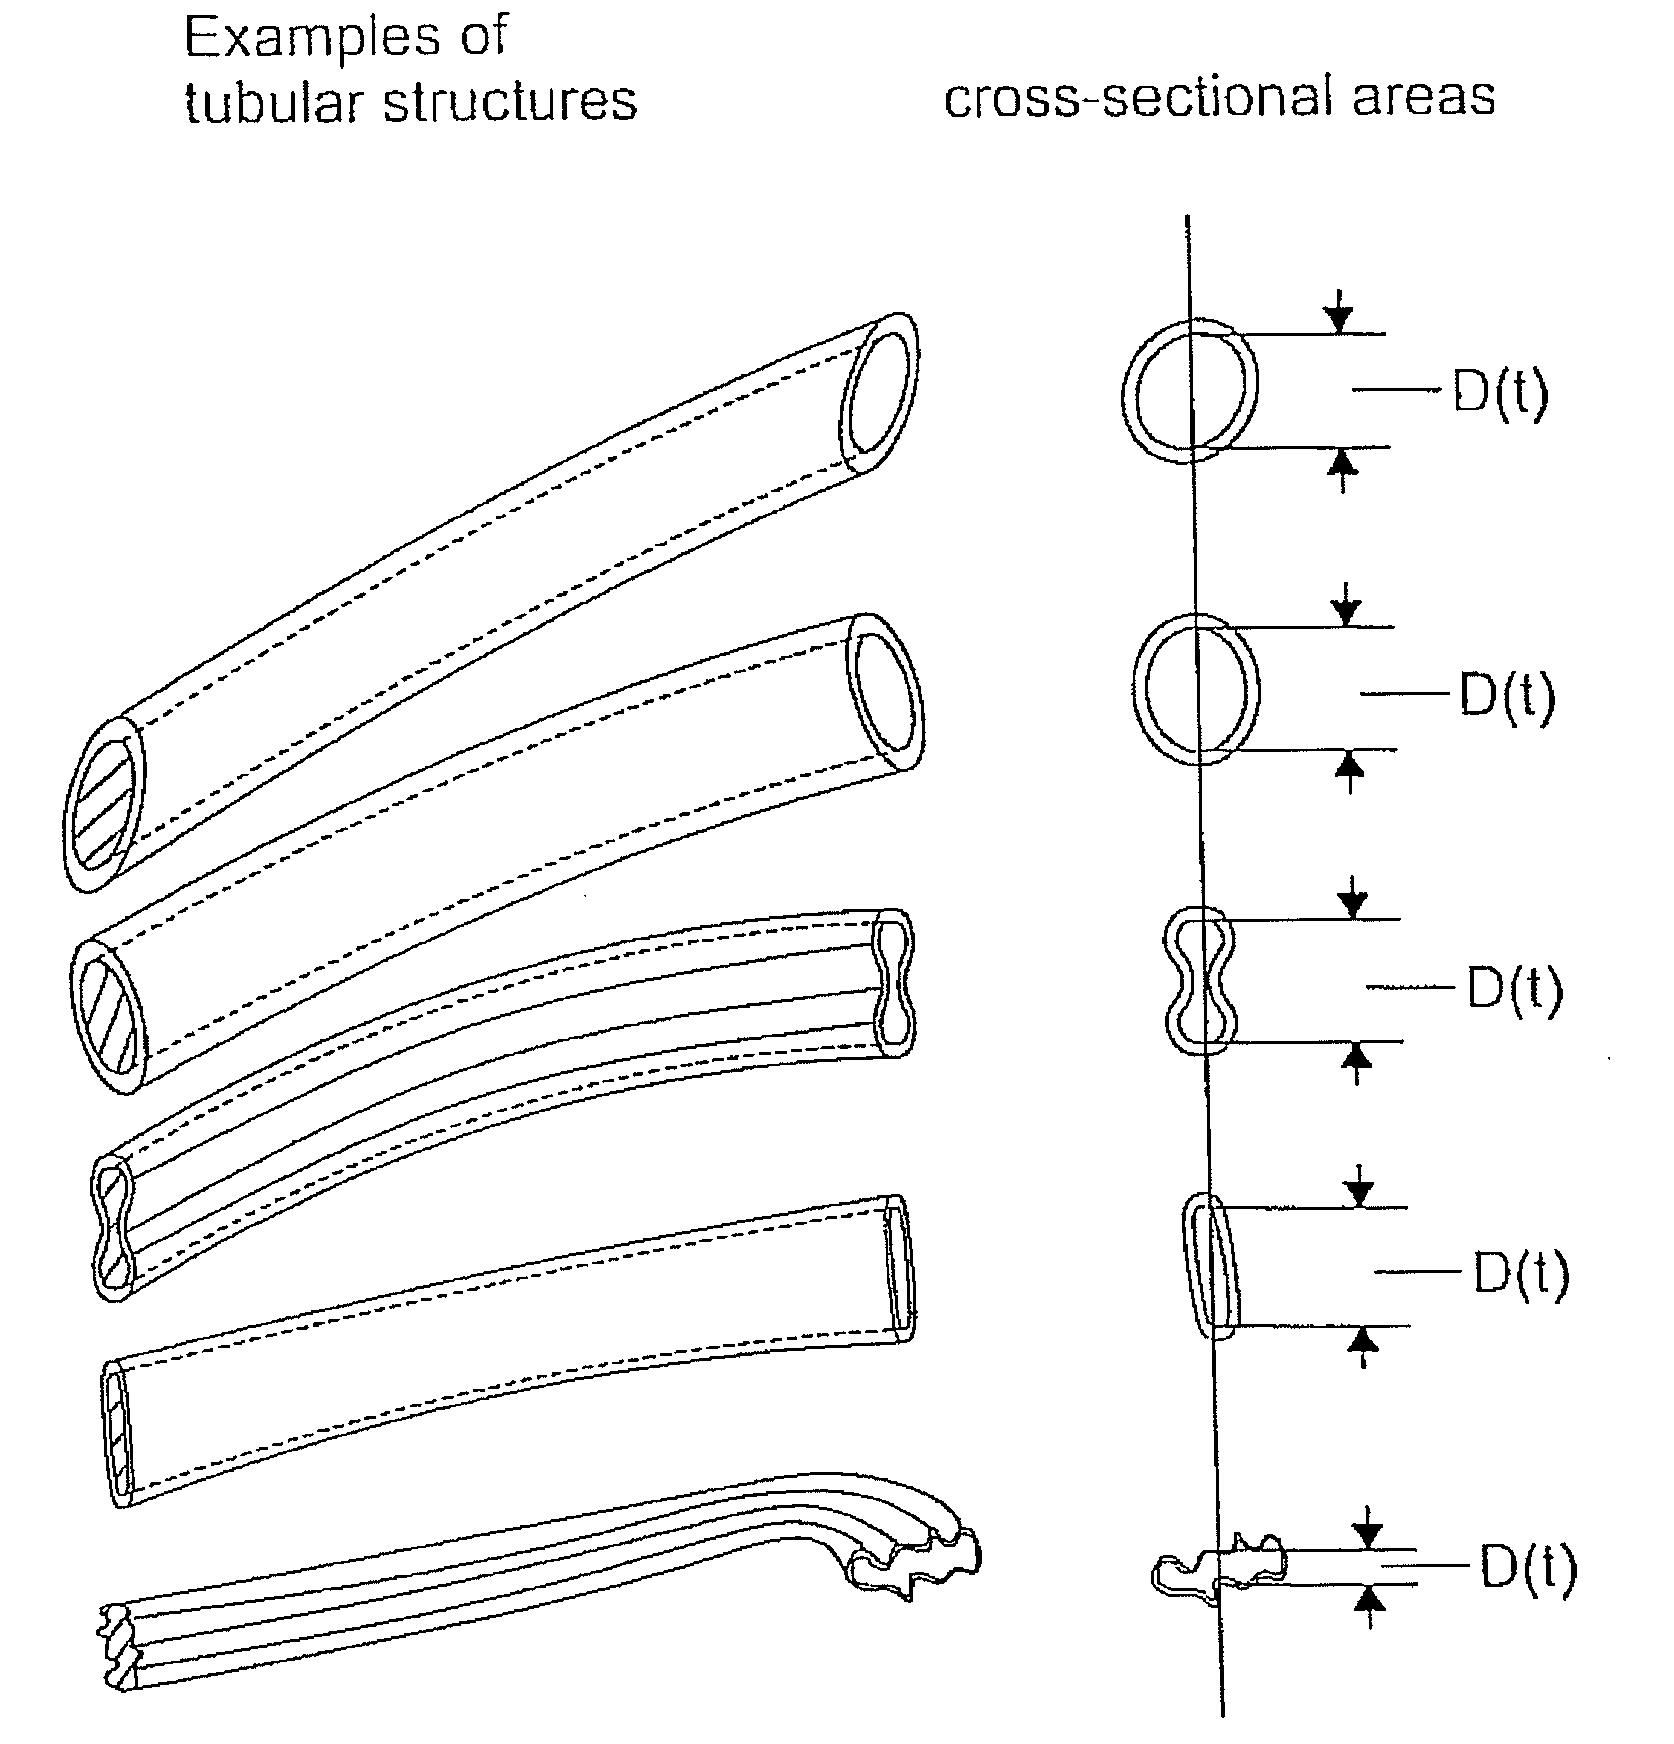 Hybrid hemodialysis access grafts or a hybrid femoral artery bypass graft and systems and methods for producing or modifying the same